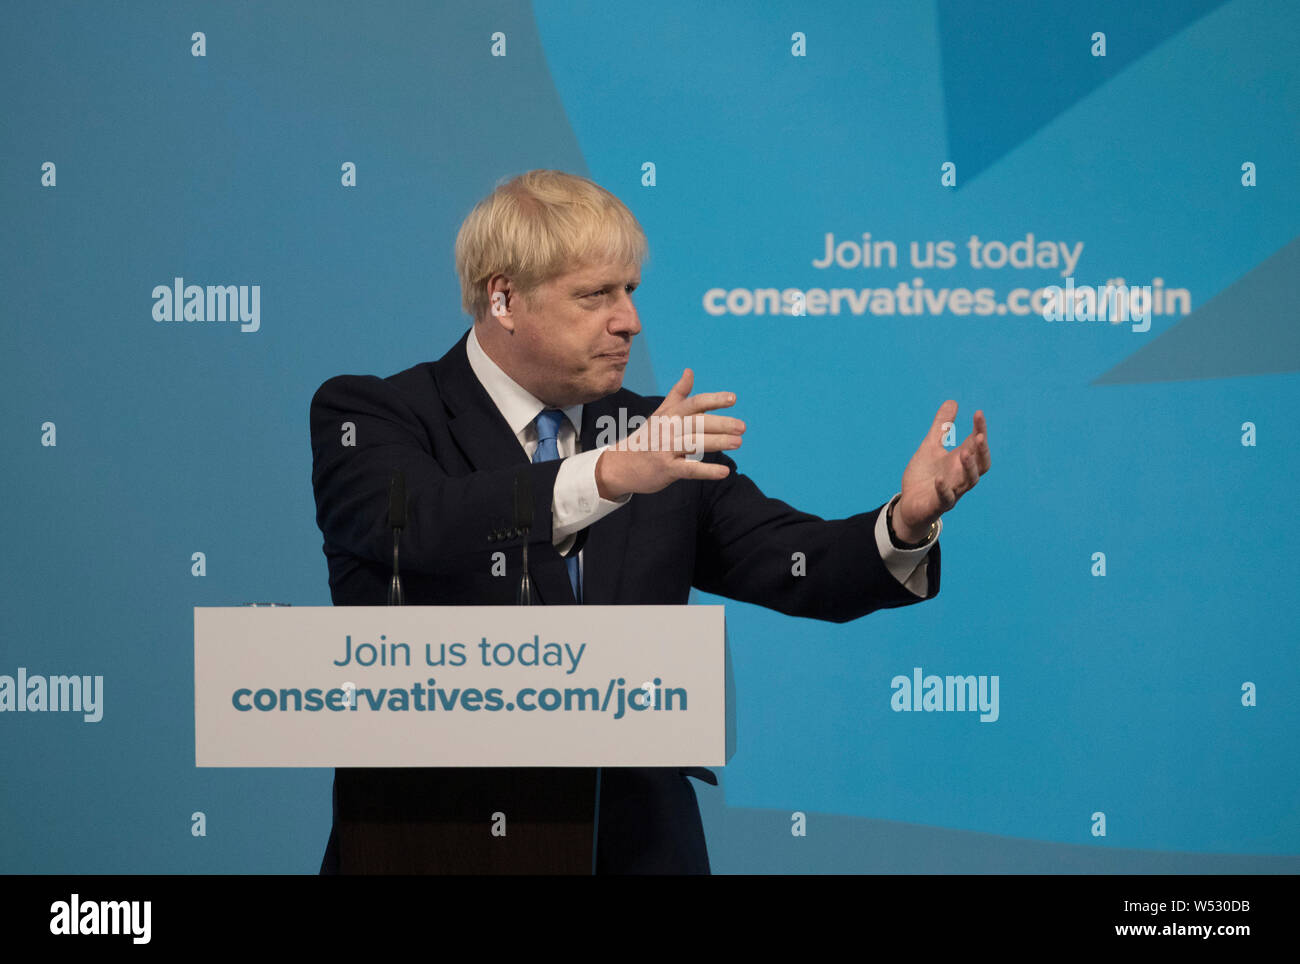 Newly elected British Prime Minister Boris Johnson speaks during the Conservative Leadership announcement at the QEII Centre on July 23, 2019 in London, England. After a month of hustings, campaigning and televised debates the members of the UK's Conservative and Unionist Party have voted for Boris Johnson to be their new leader and the country's next Prime Minister, replacing Theresa May. Stock Photo